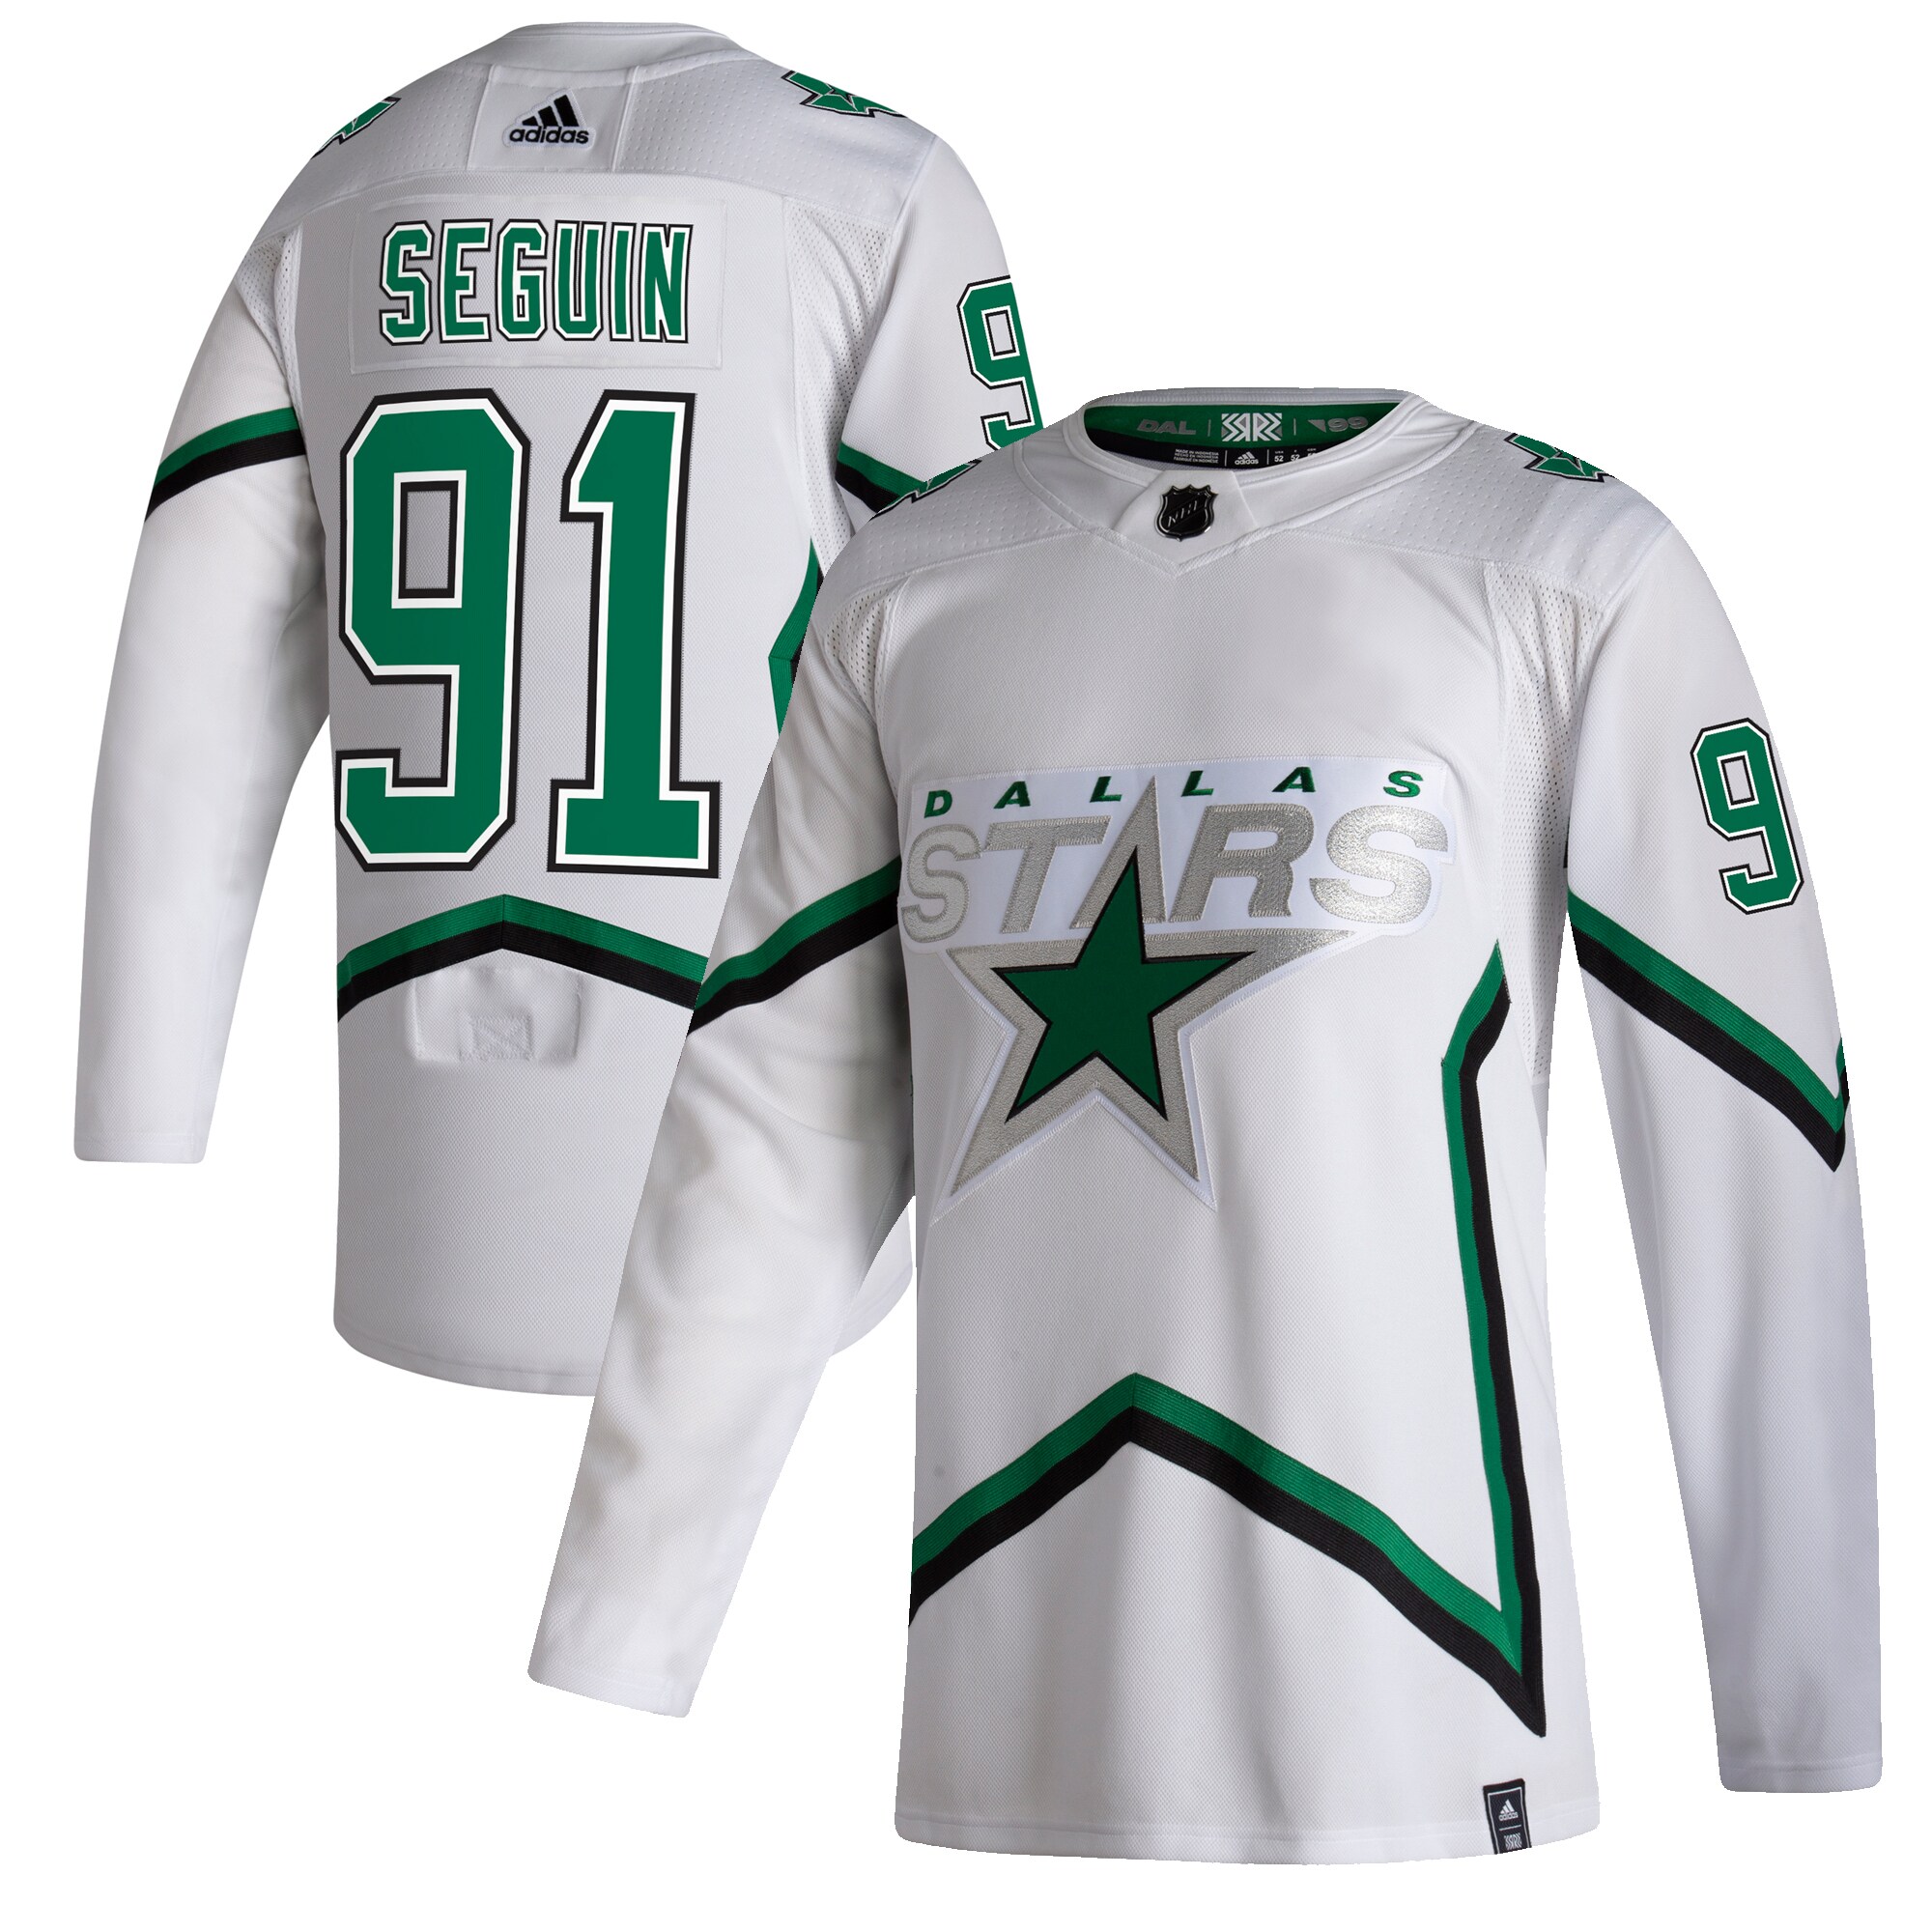 NHL fans will love these Reverse Retro jerseys